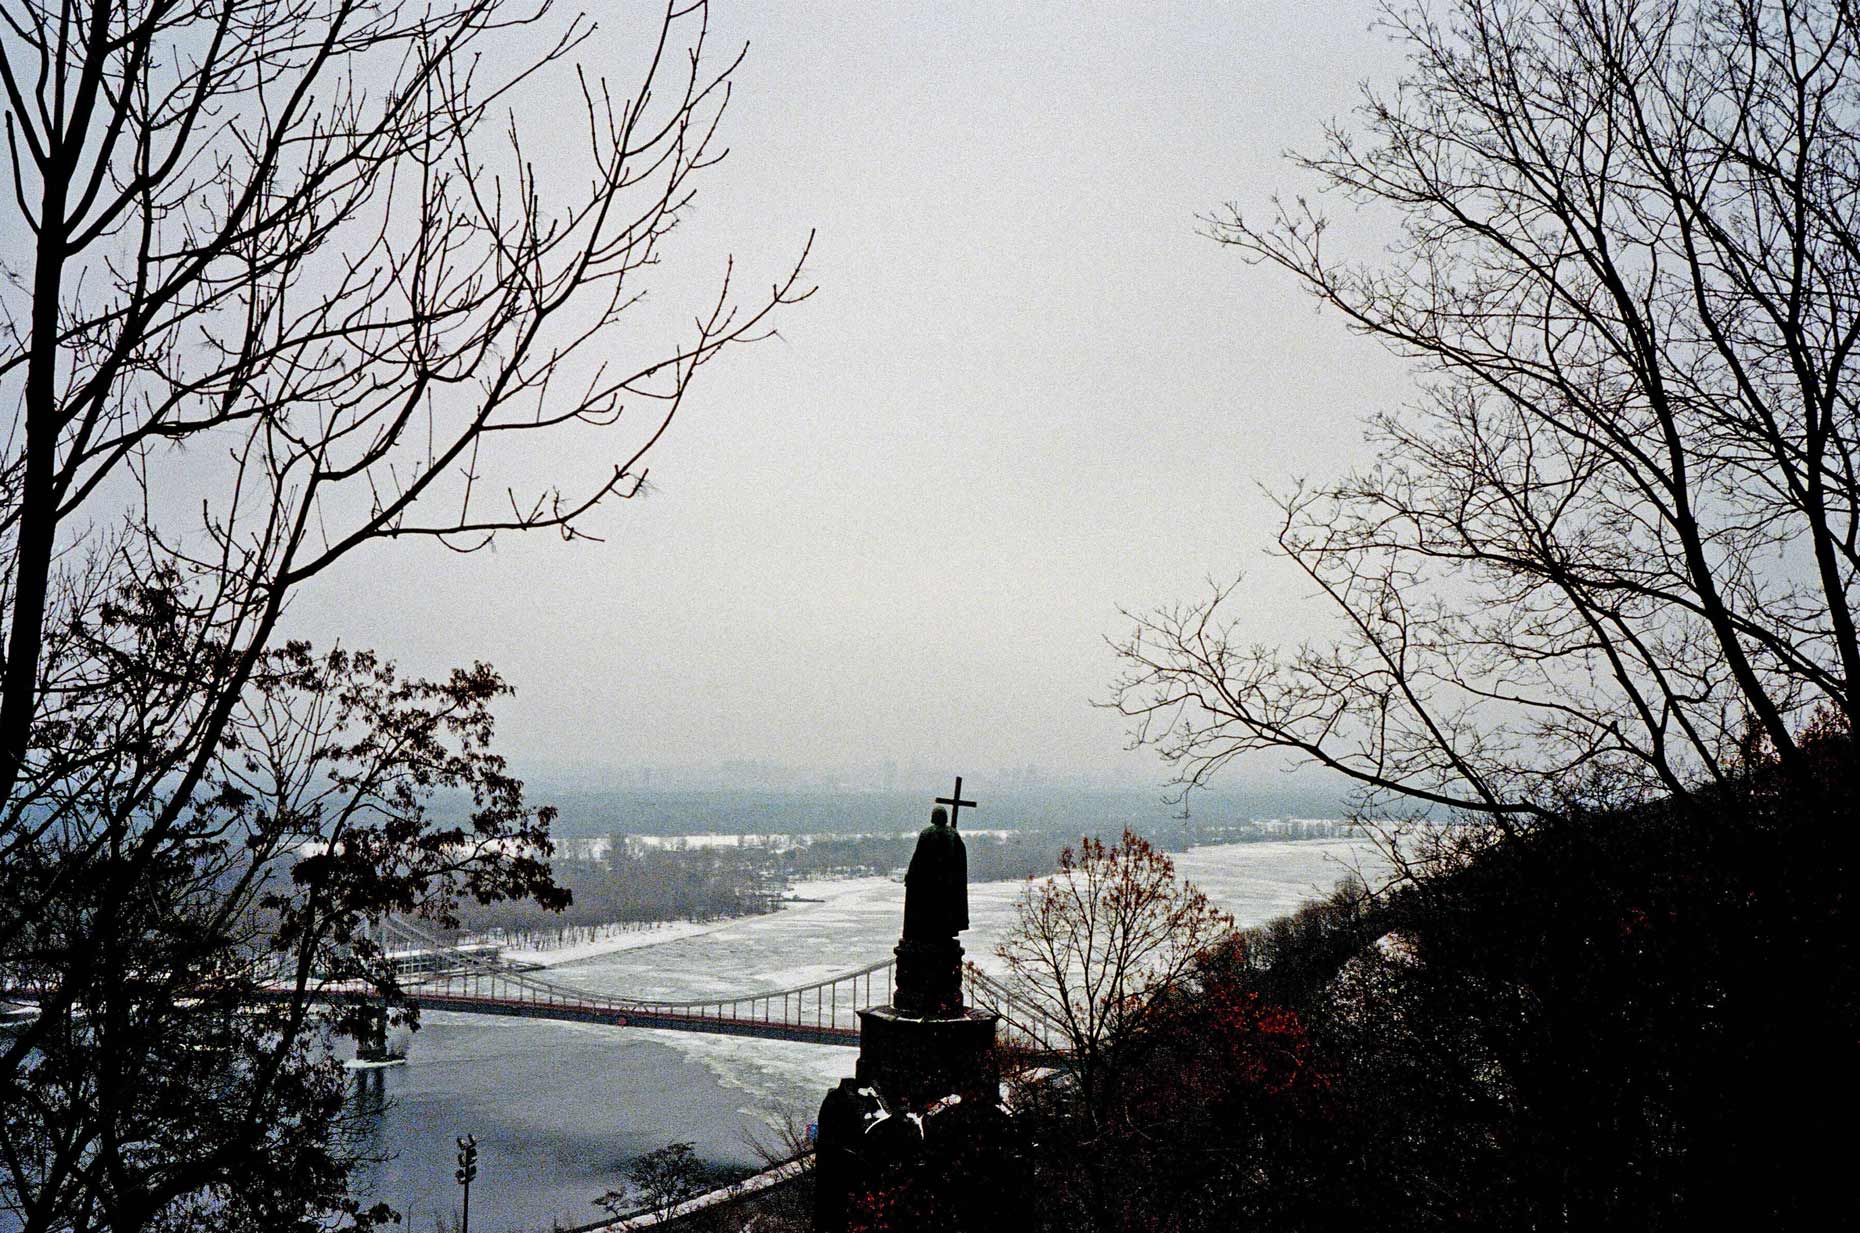 Dnipro River from the Saint Volodymyr Statue, Ukraine